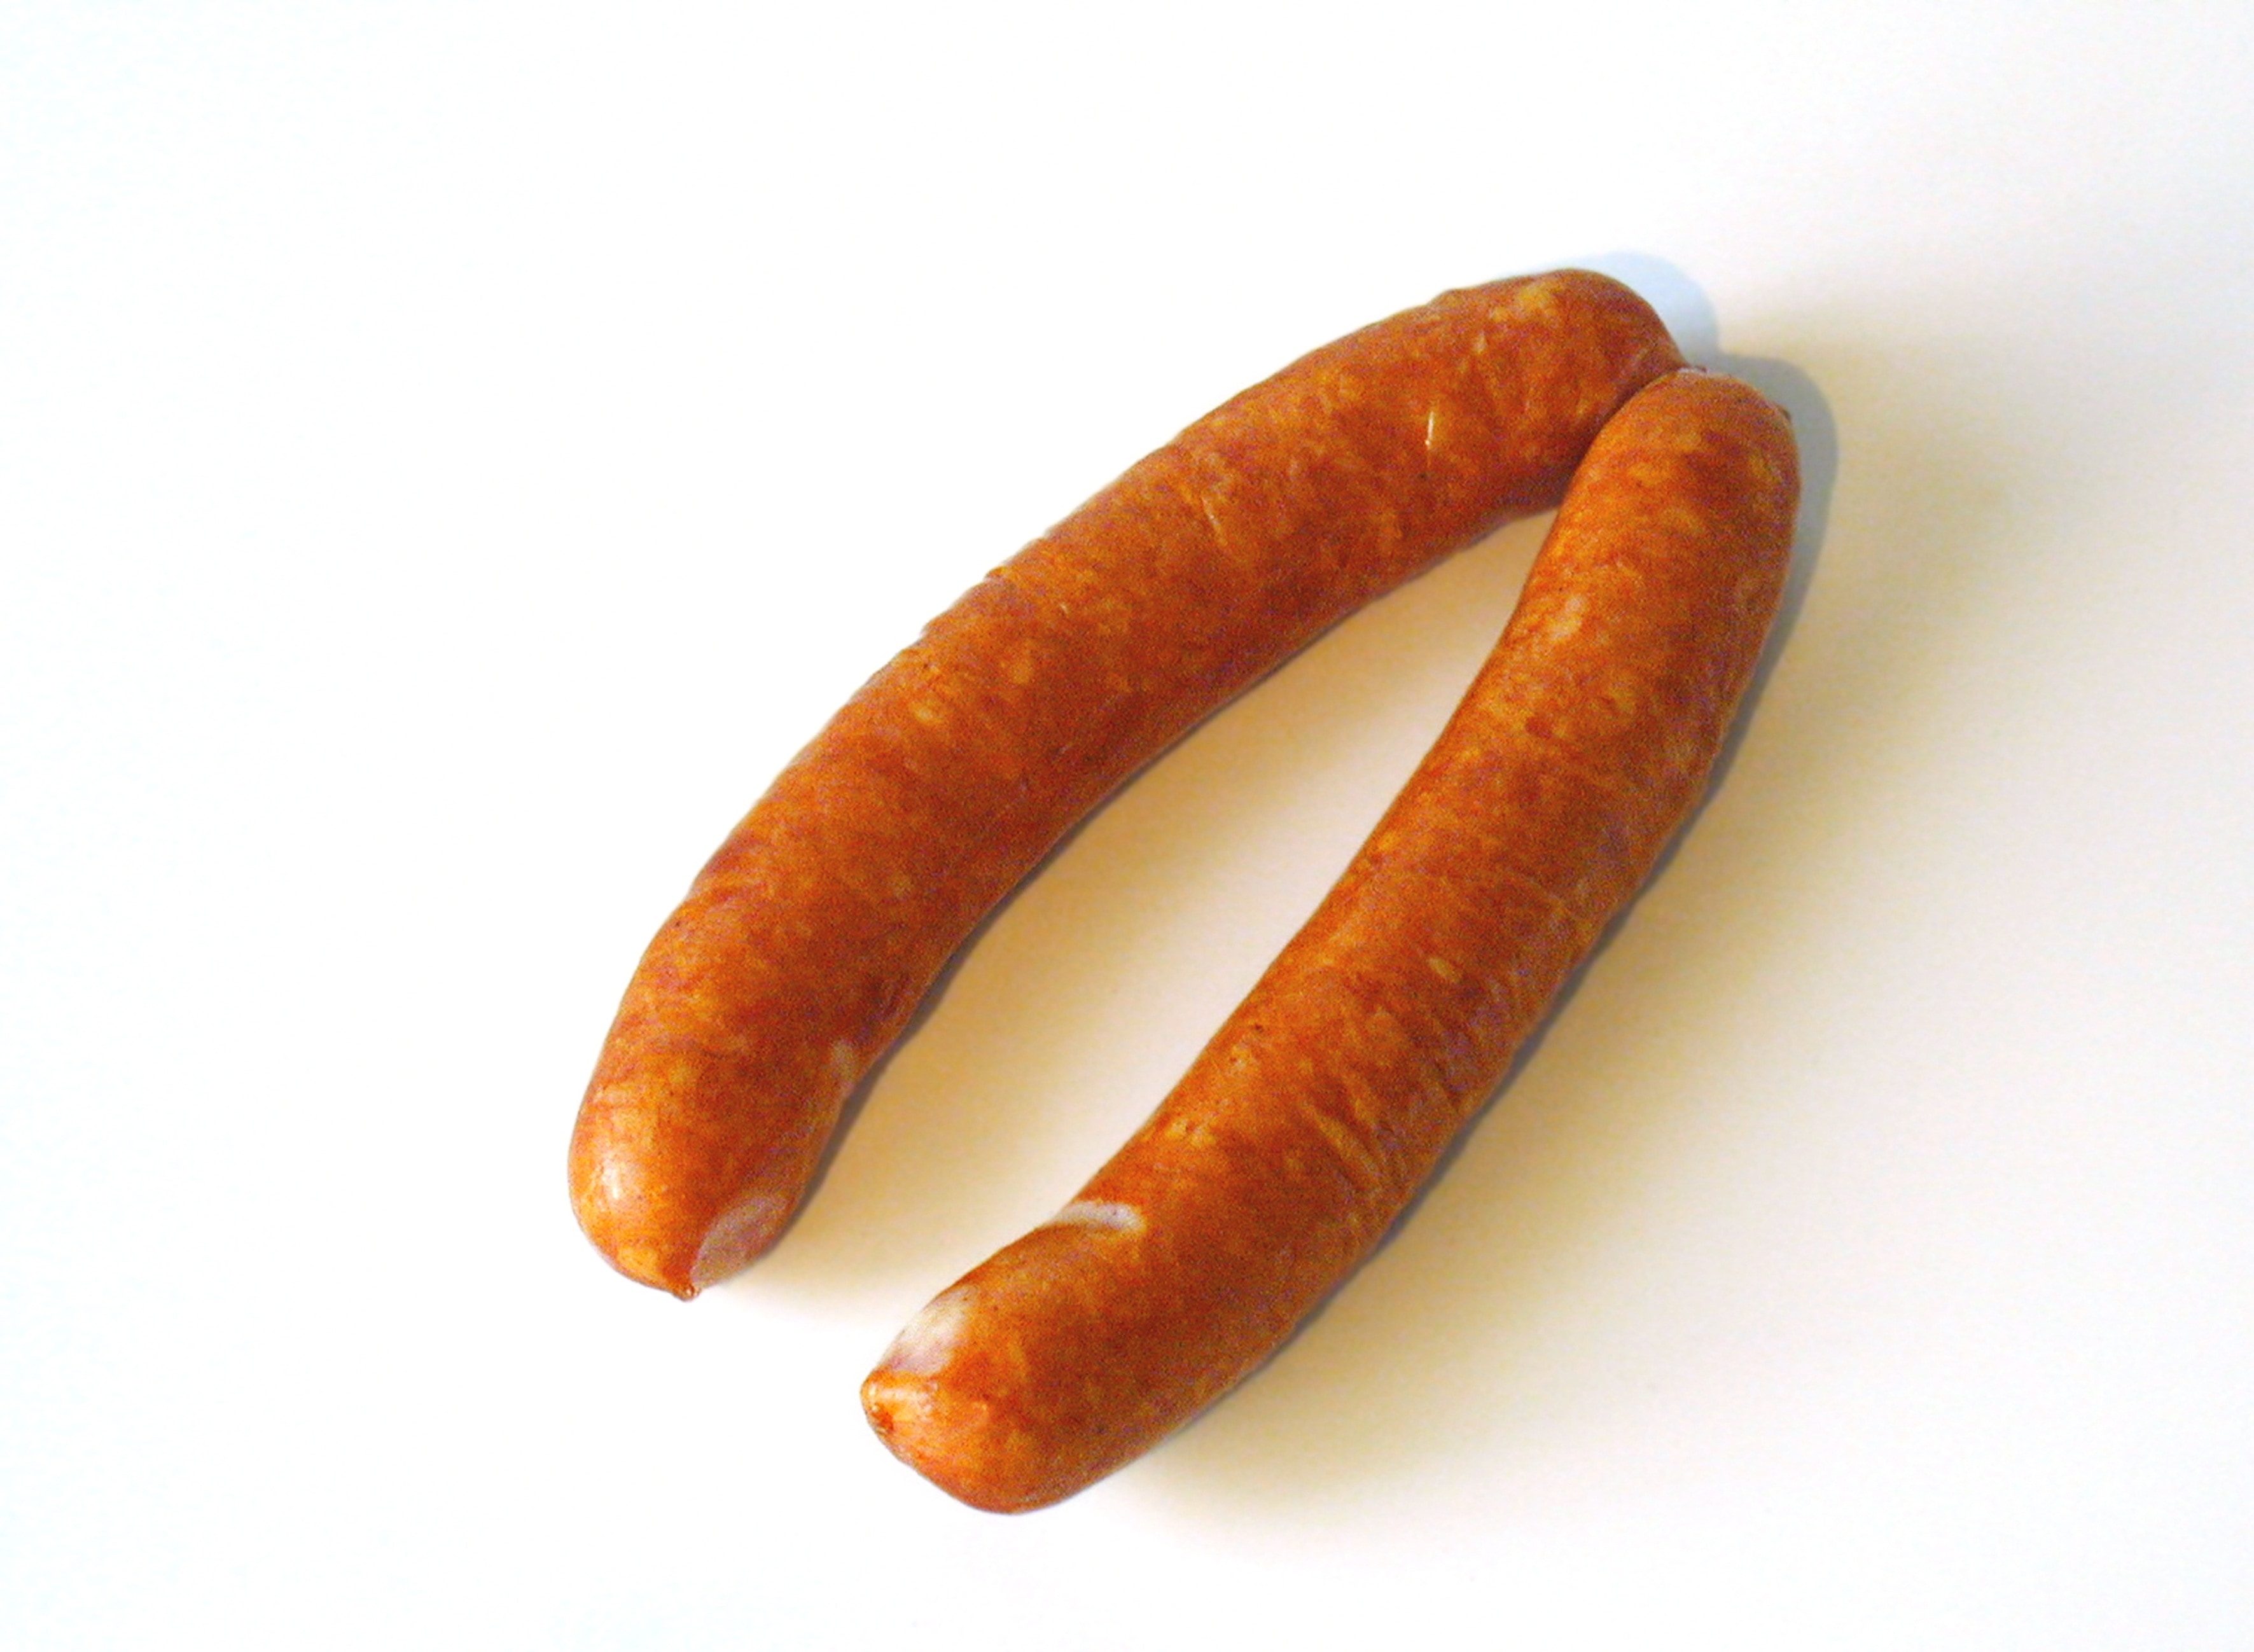 Two Sausage On White Surface Image